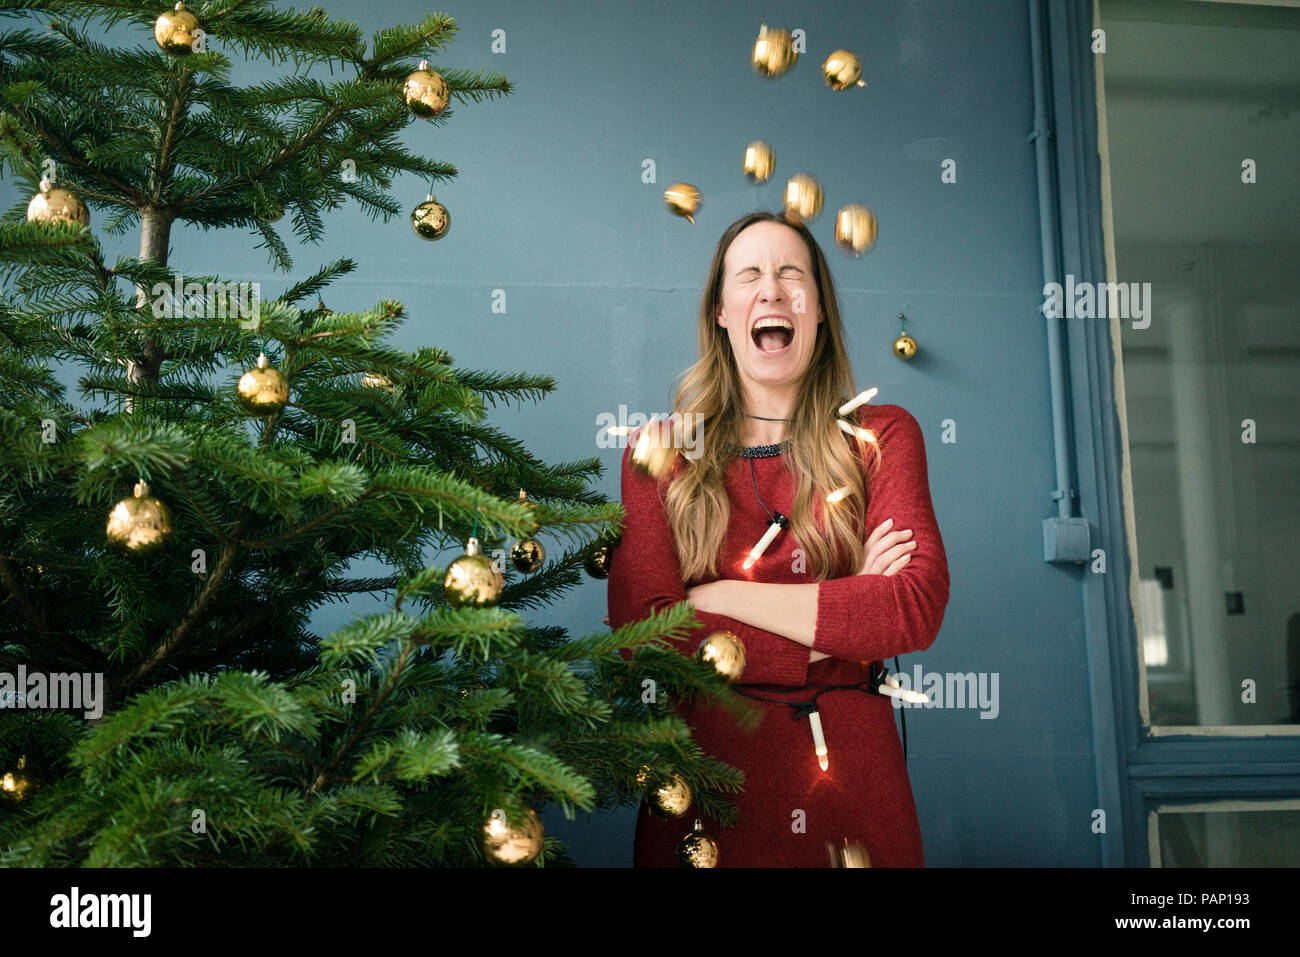 Screaming woman standing besides Christmas tree Stock Photo